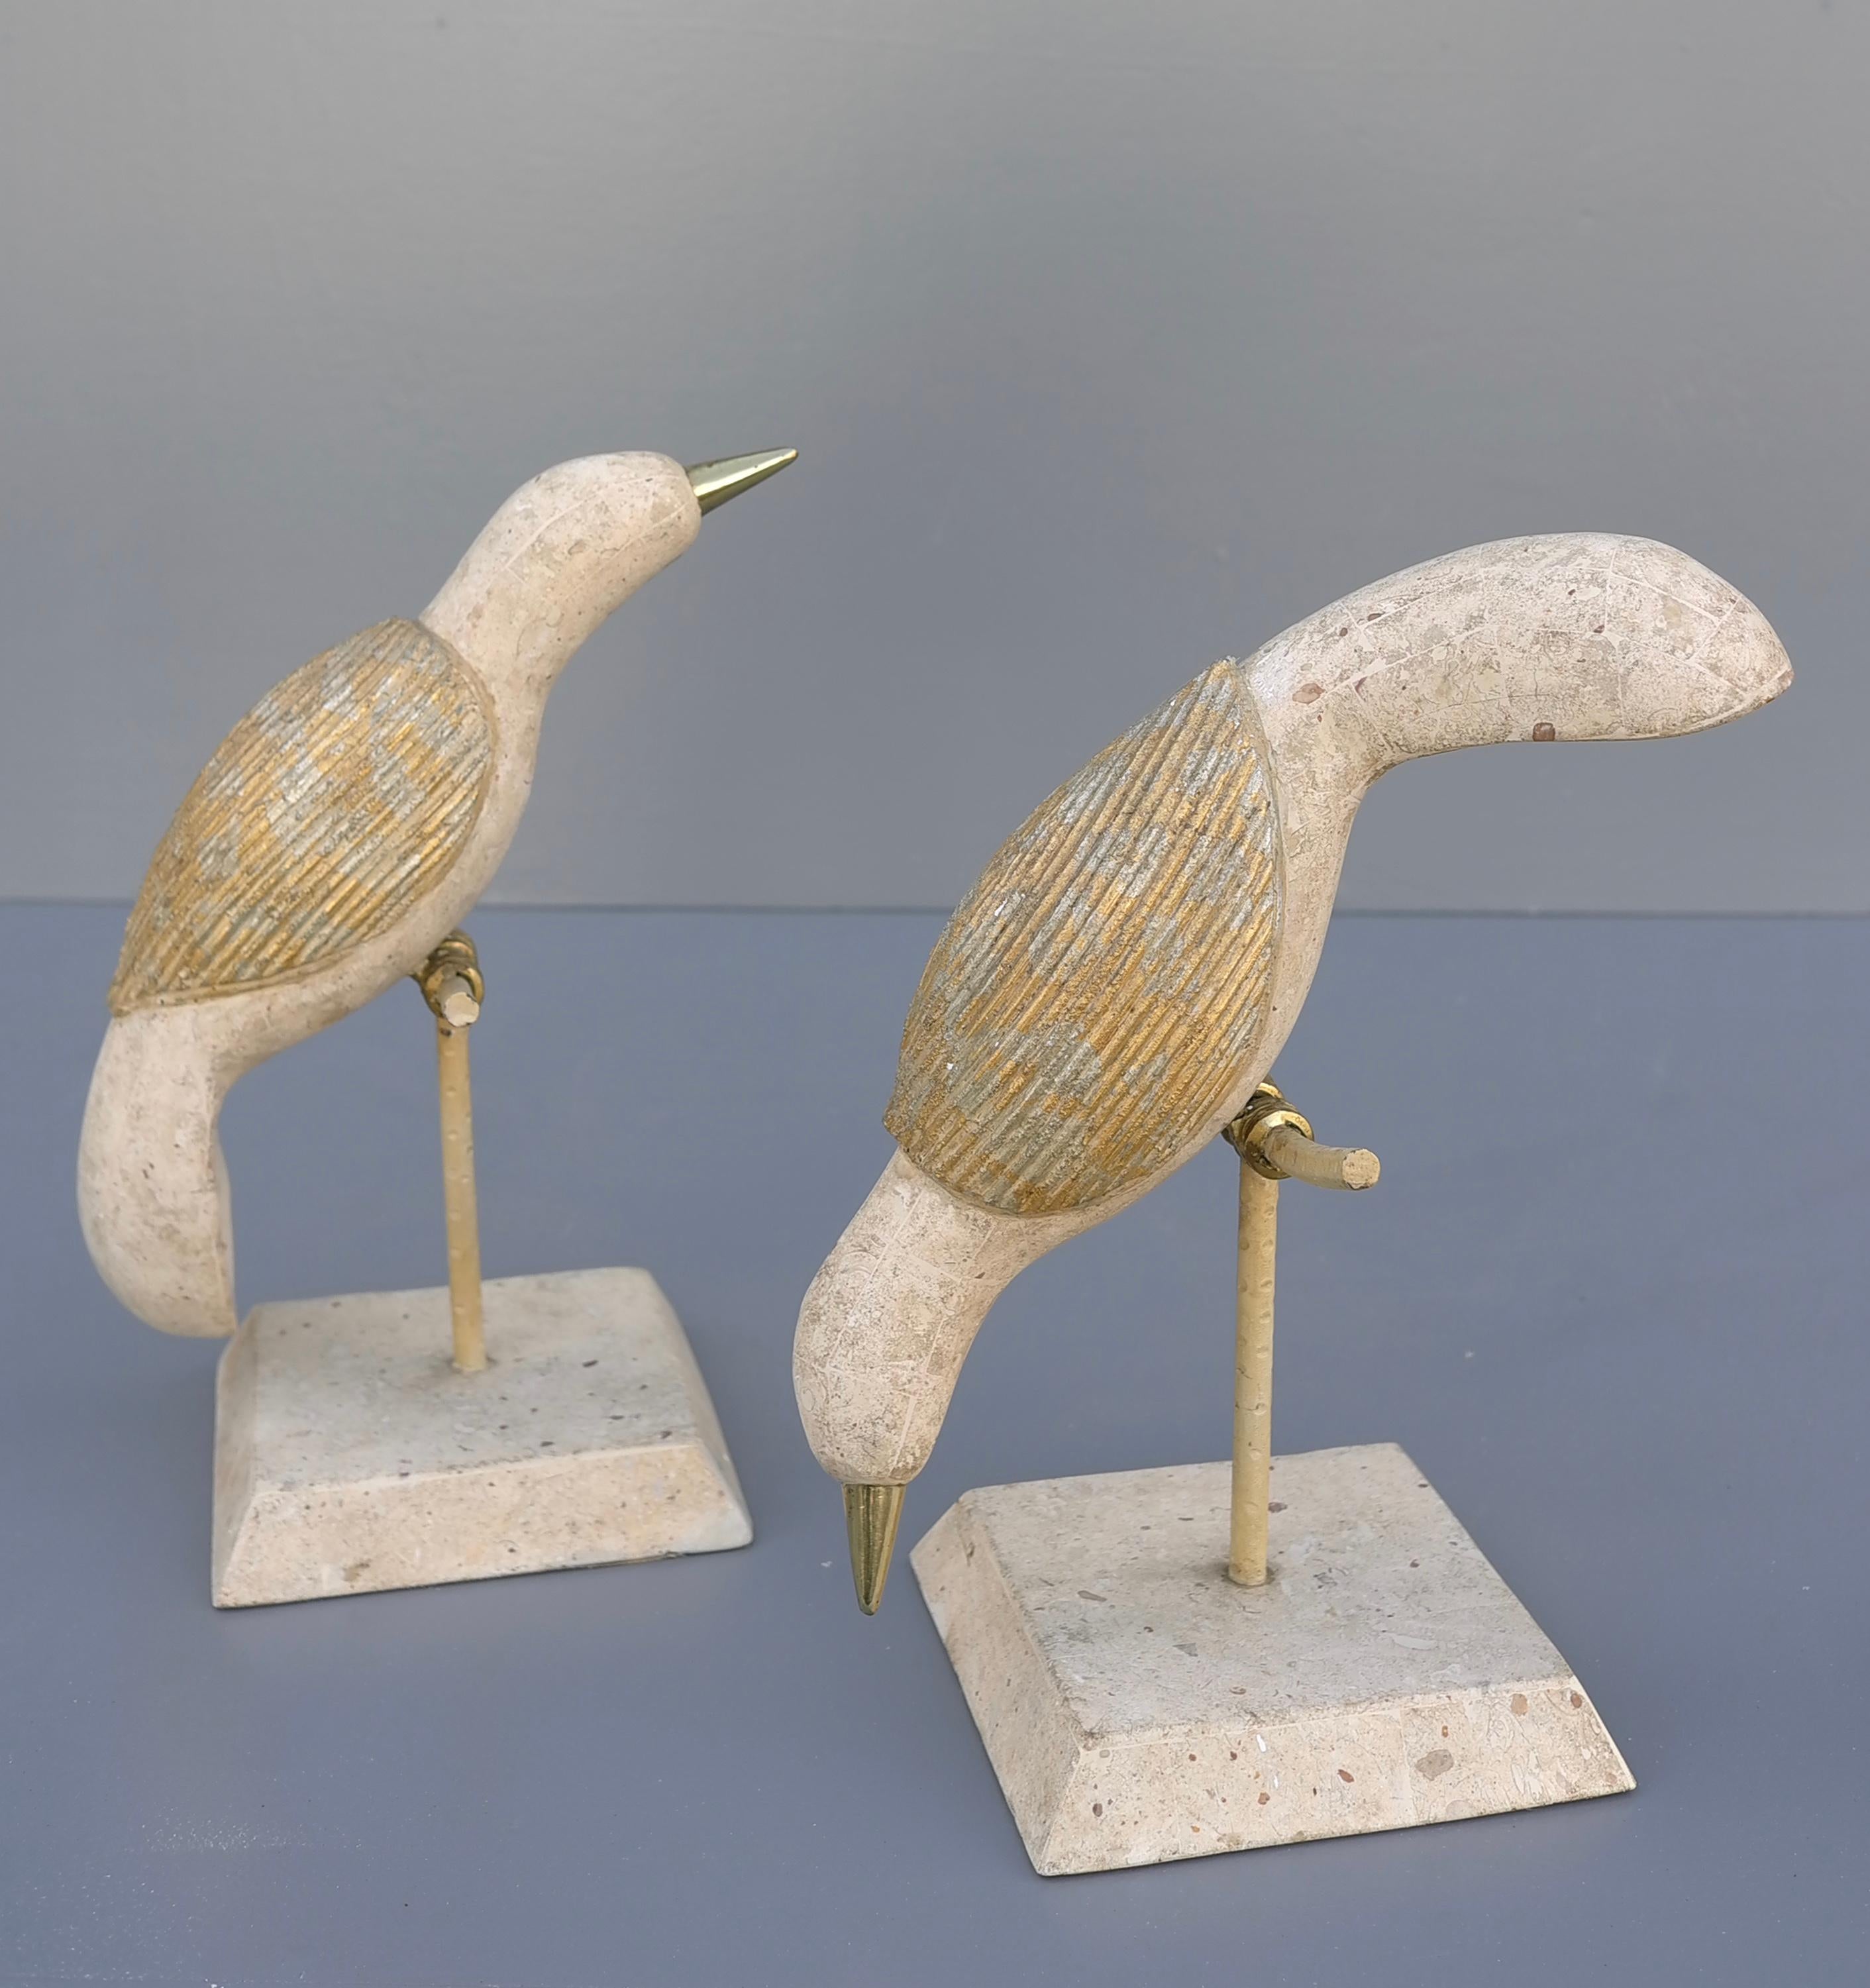 Philippine Tessellated Stone and Brass Birds Abstract Sculptures by Maitland Smith 1970's For Sale